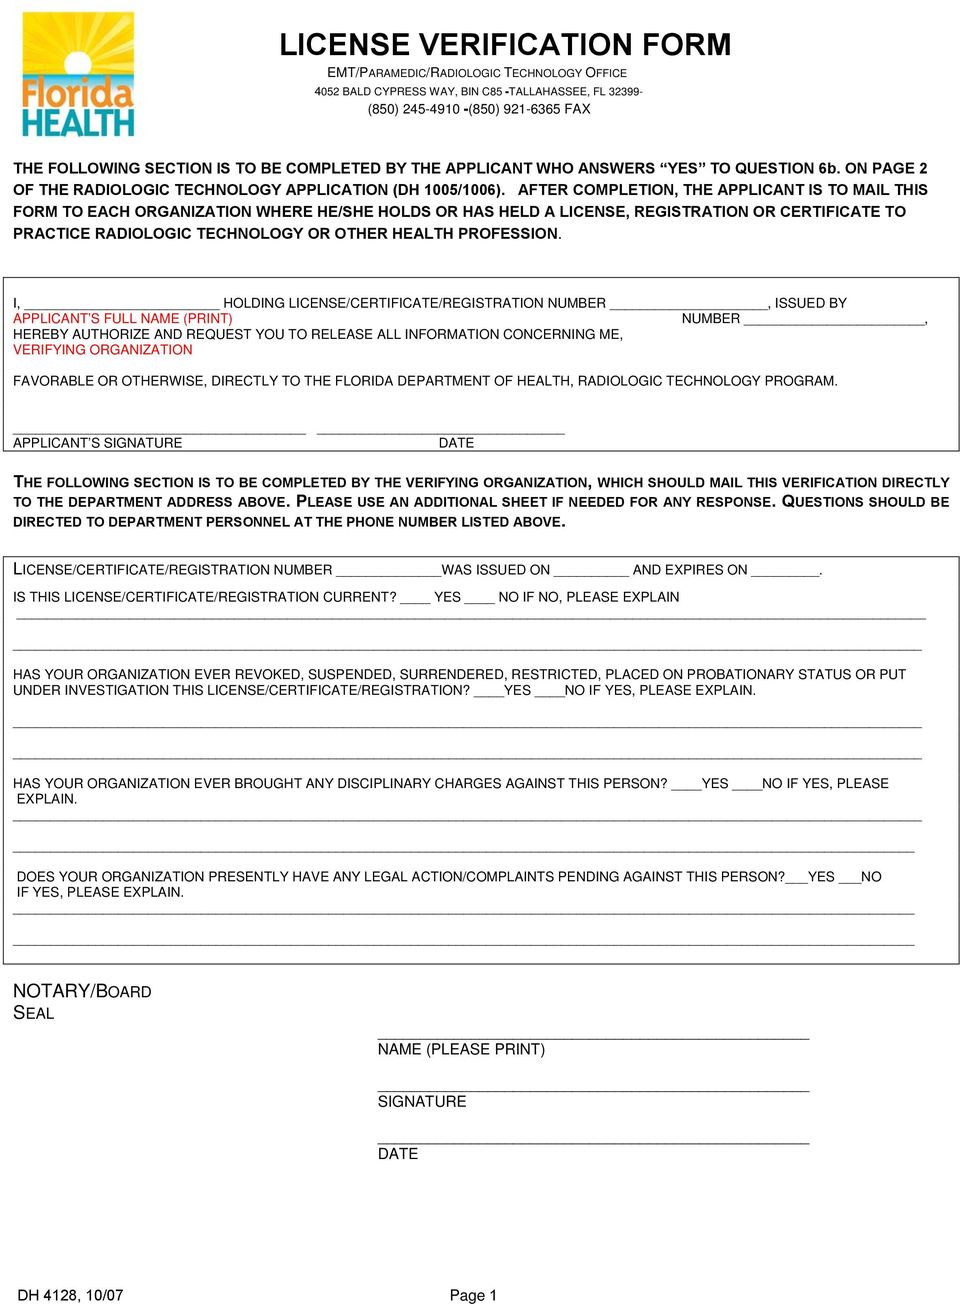 AFTER COMPLETION, THE APPLICANT IS TO MAIL THIS FORM TO EACH ORGANIZATION WHERE HE/SHE HOLDS OR HAS HELD A LICENSE, REGISTRATION OR CERTIFICATE TO PRACTICE RADIOLOGIC TECHNOLOGY OR OTHER HEALTH